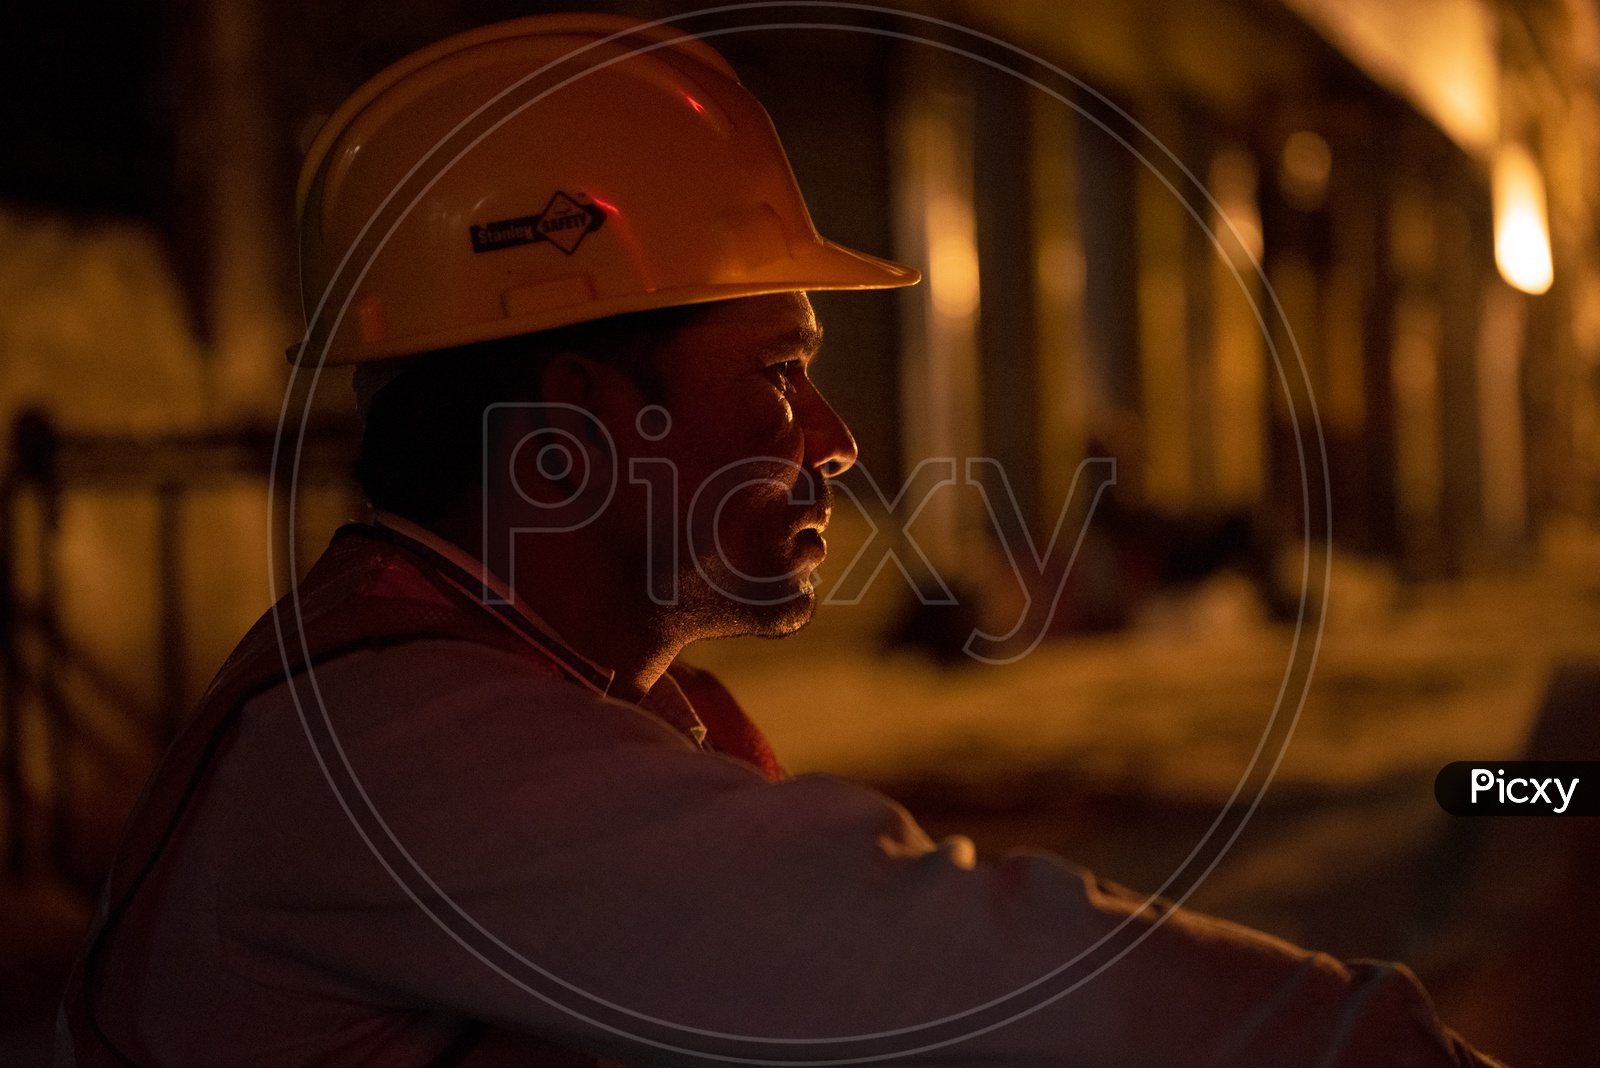 A Metro Construction Worker Sitting At a Work Place By Wearing Safety Helmet